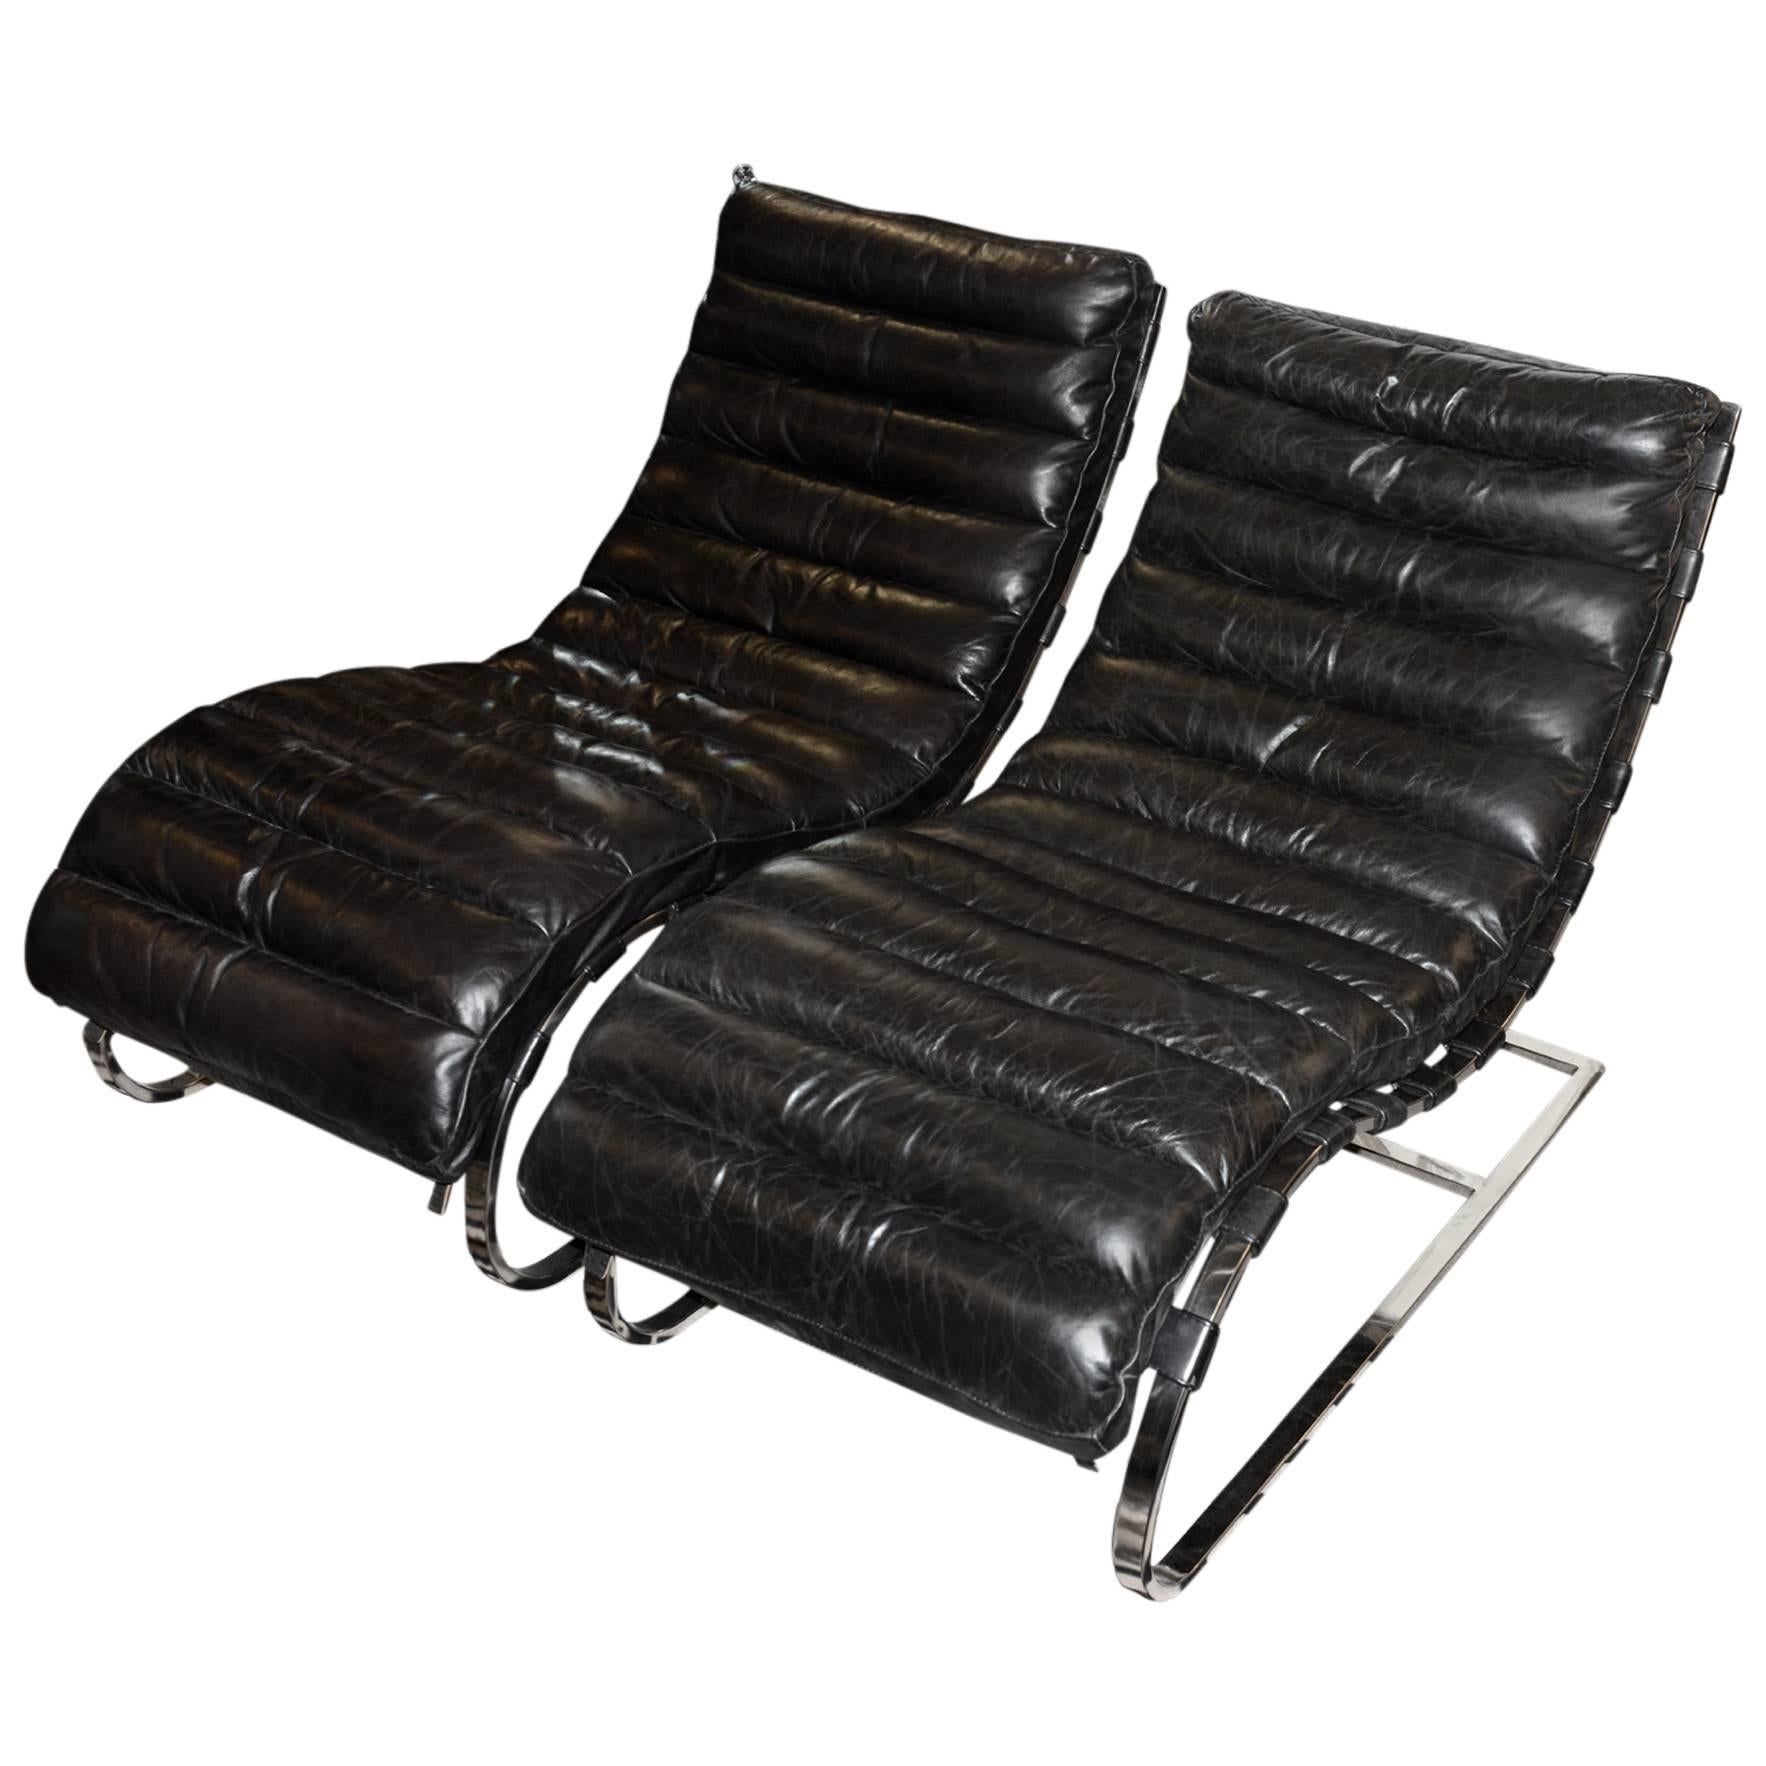 Daybed Lounge Chair in Black Genuine Leather